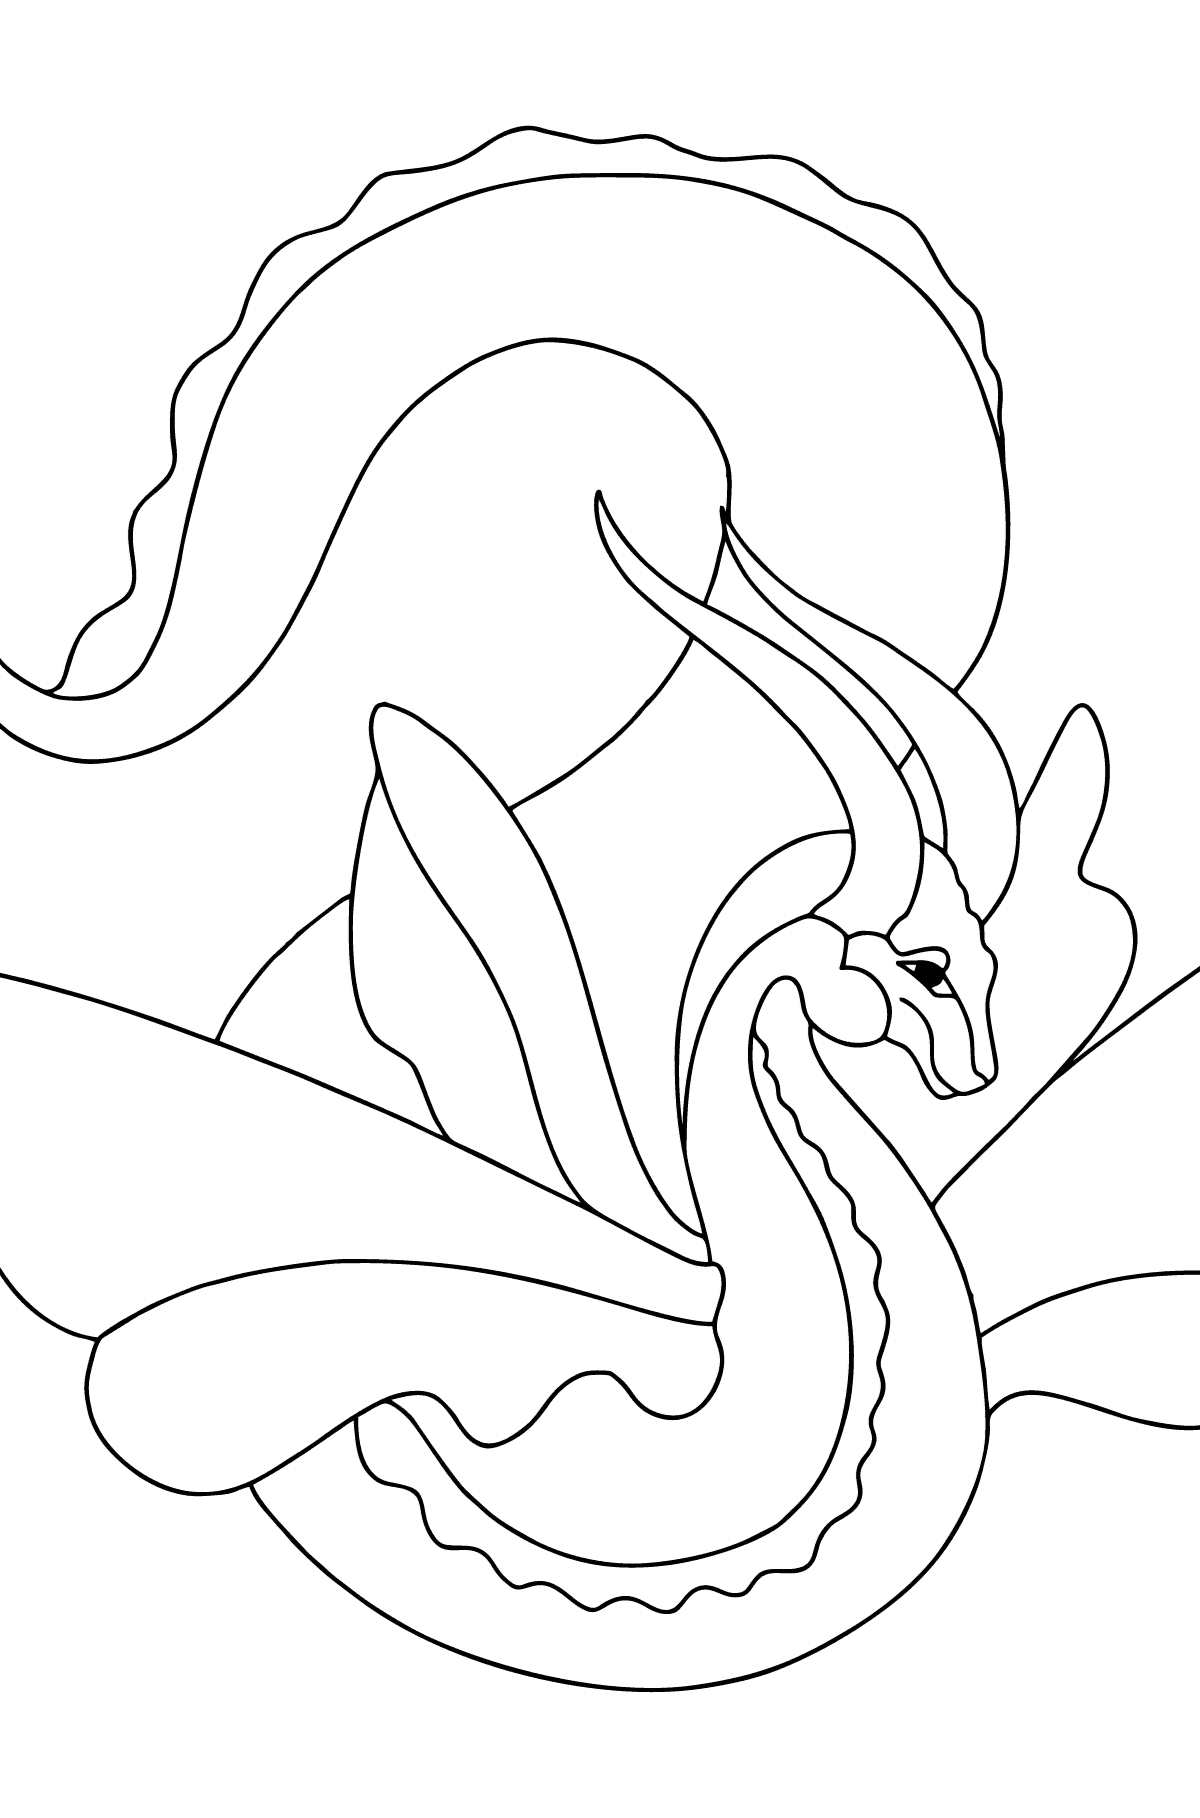 Cute Dragon Coloring Page (difficult) - Coloring Pages for Kids